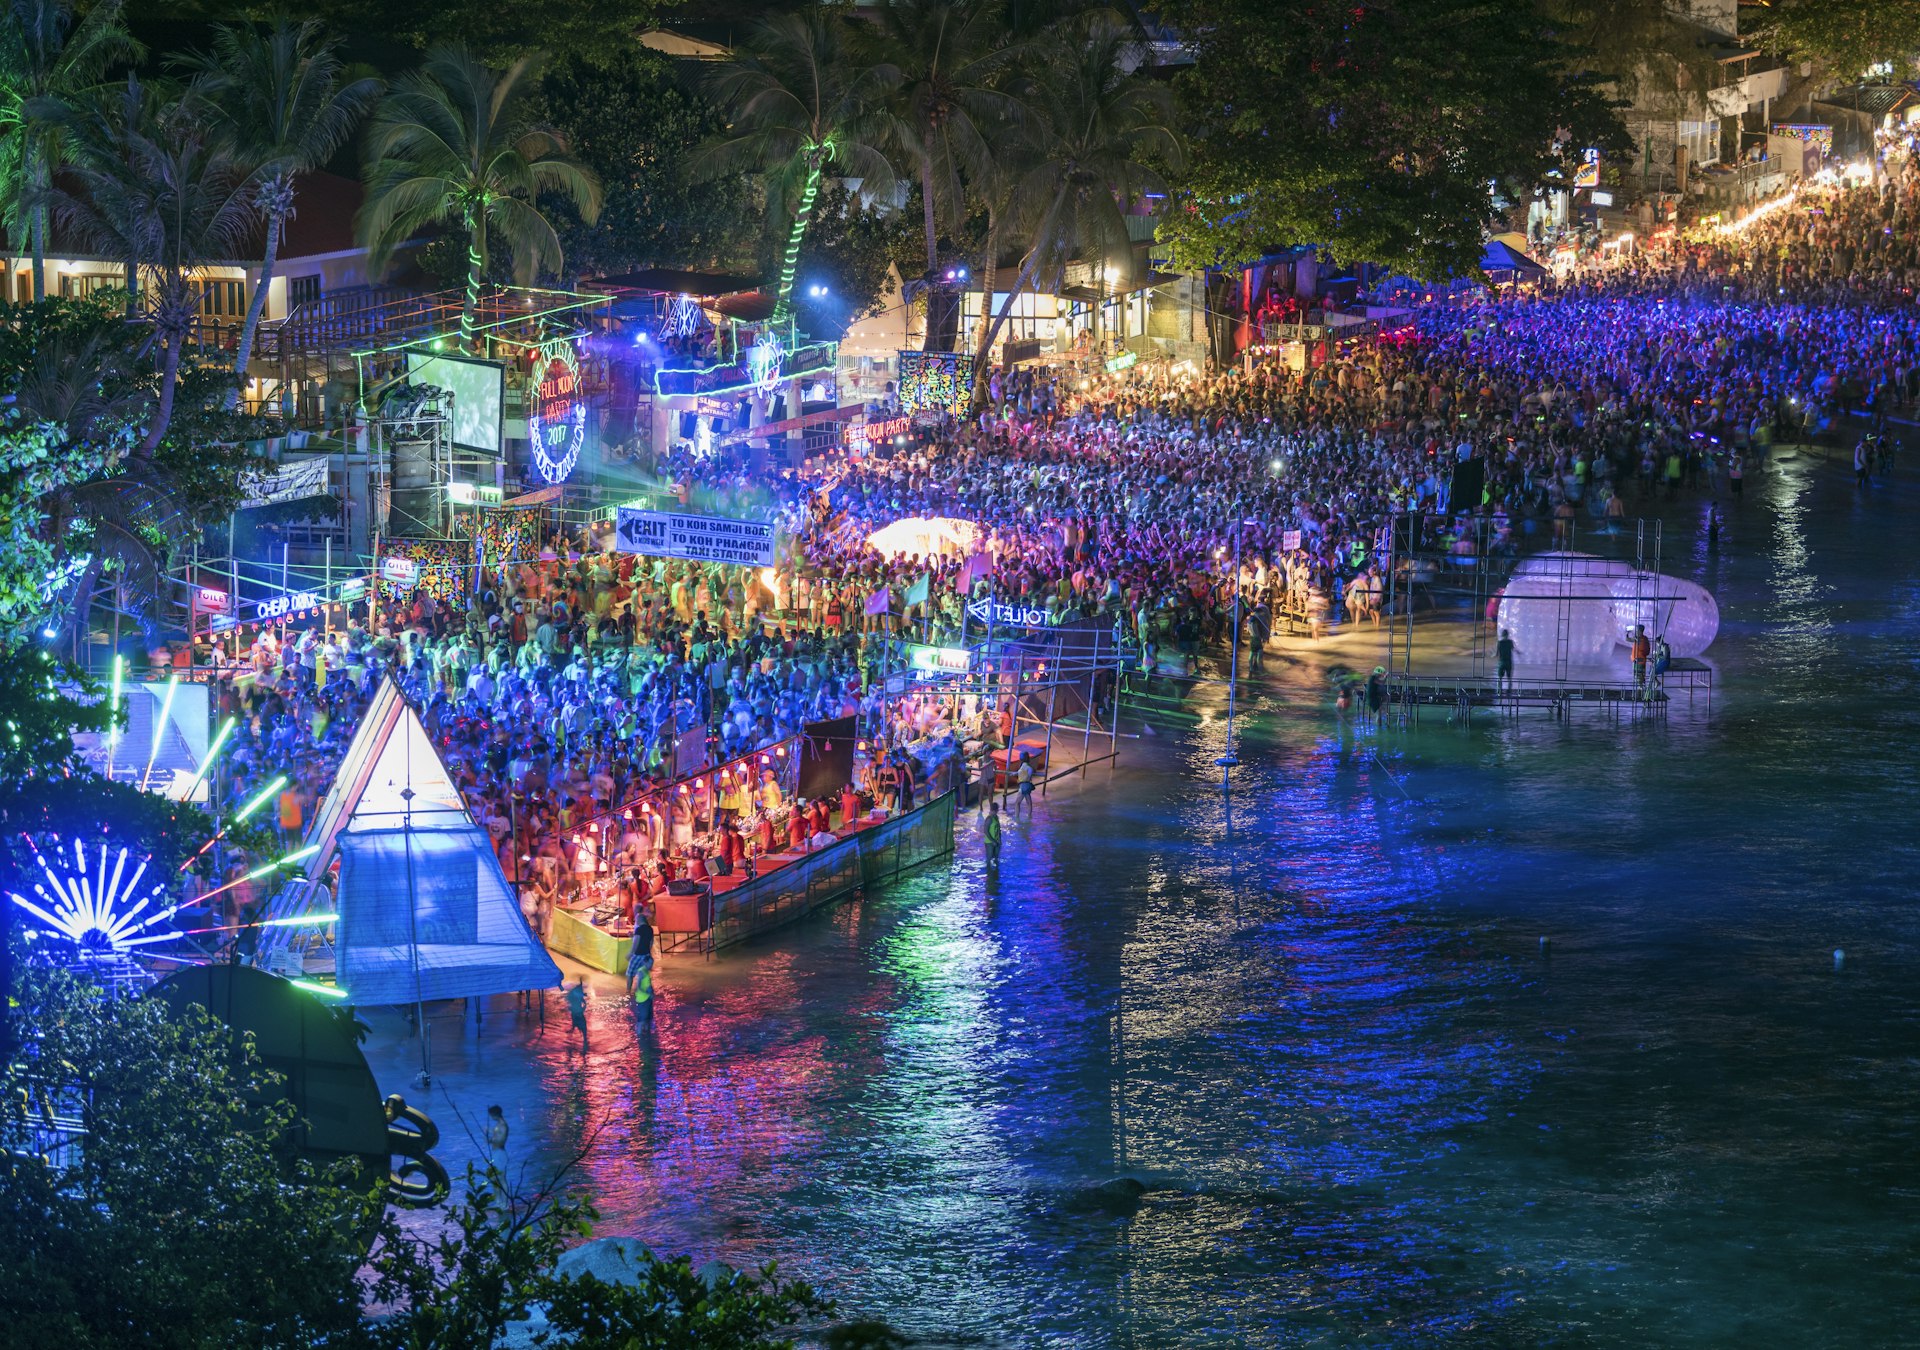 An aerial shot showing a beach crowded with revellers at nighttime